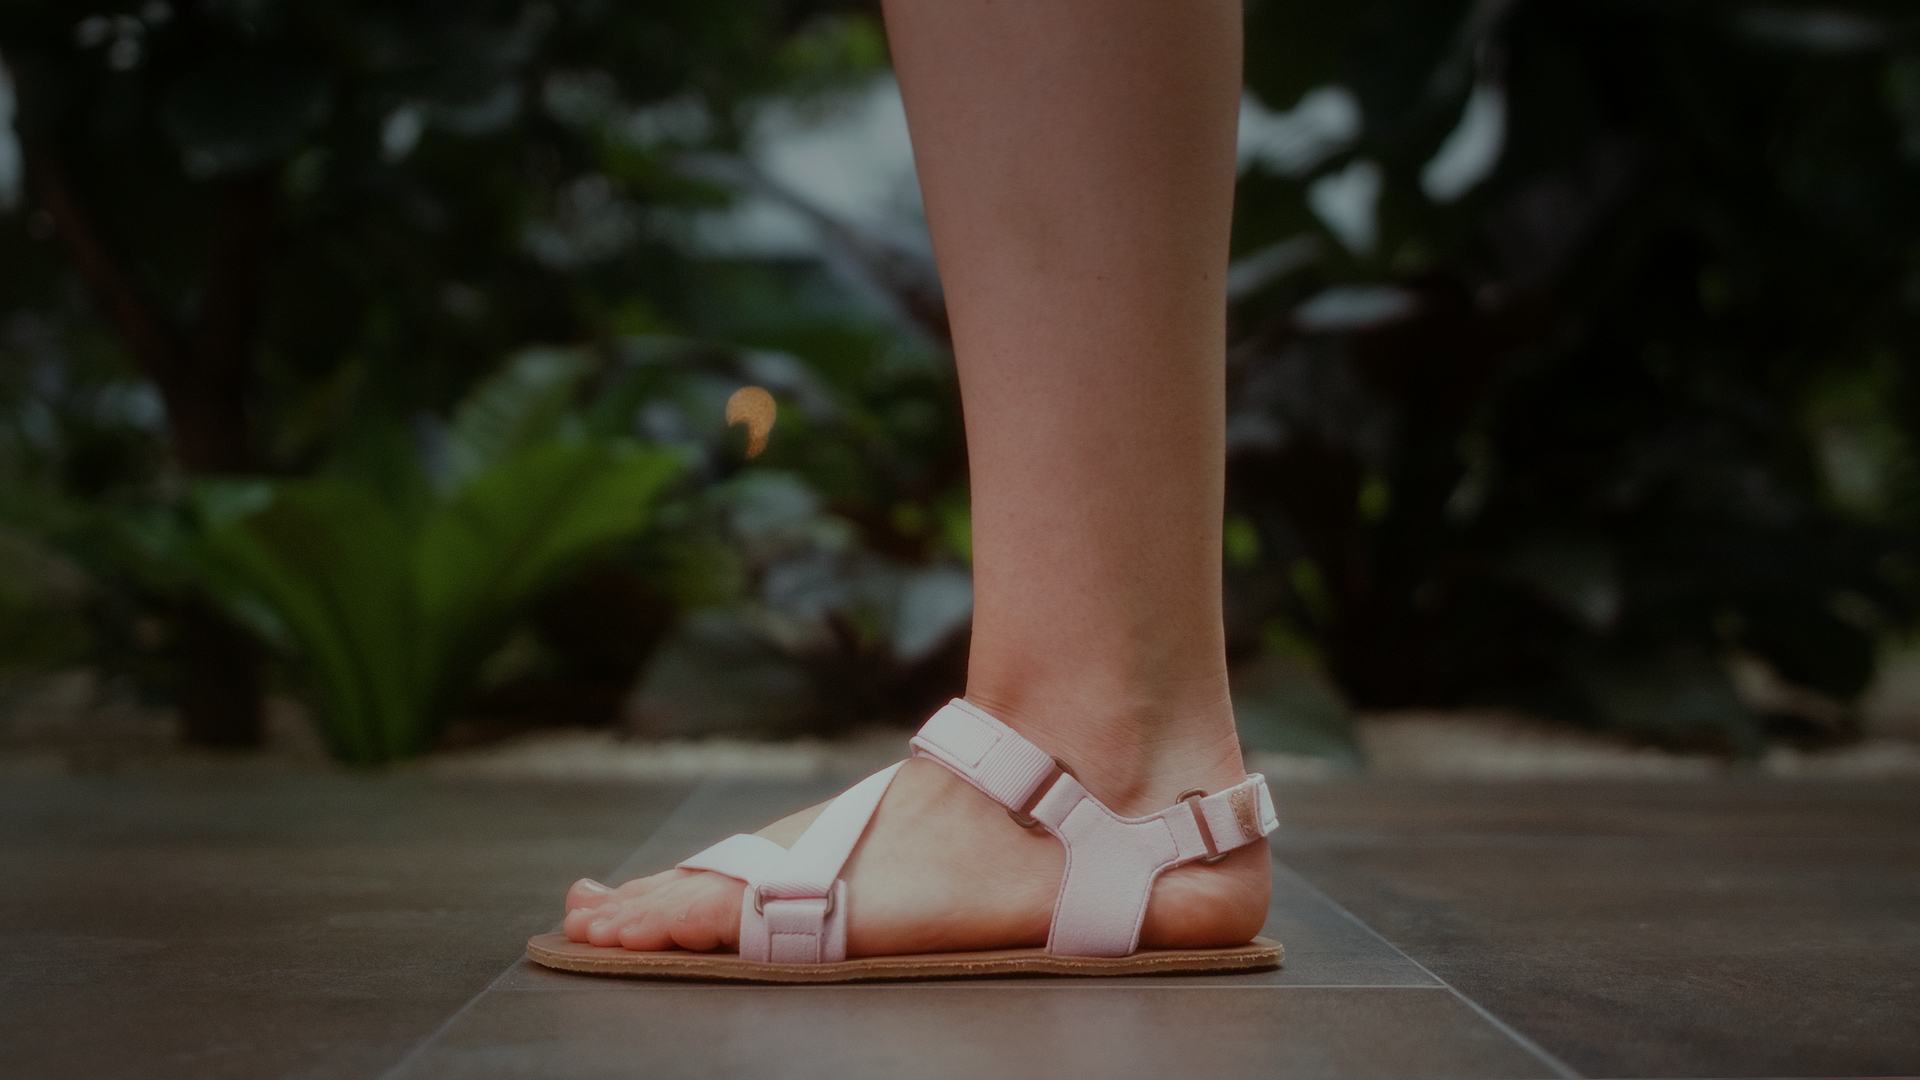 Experience the barefoot comfort - Switch to Be Lenka barefoot.